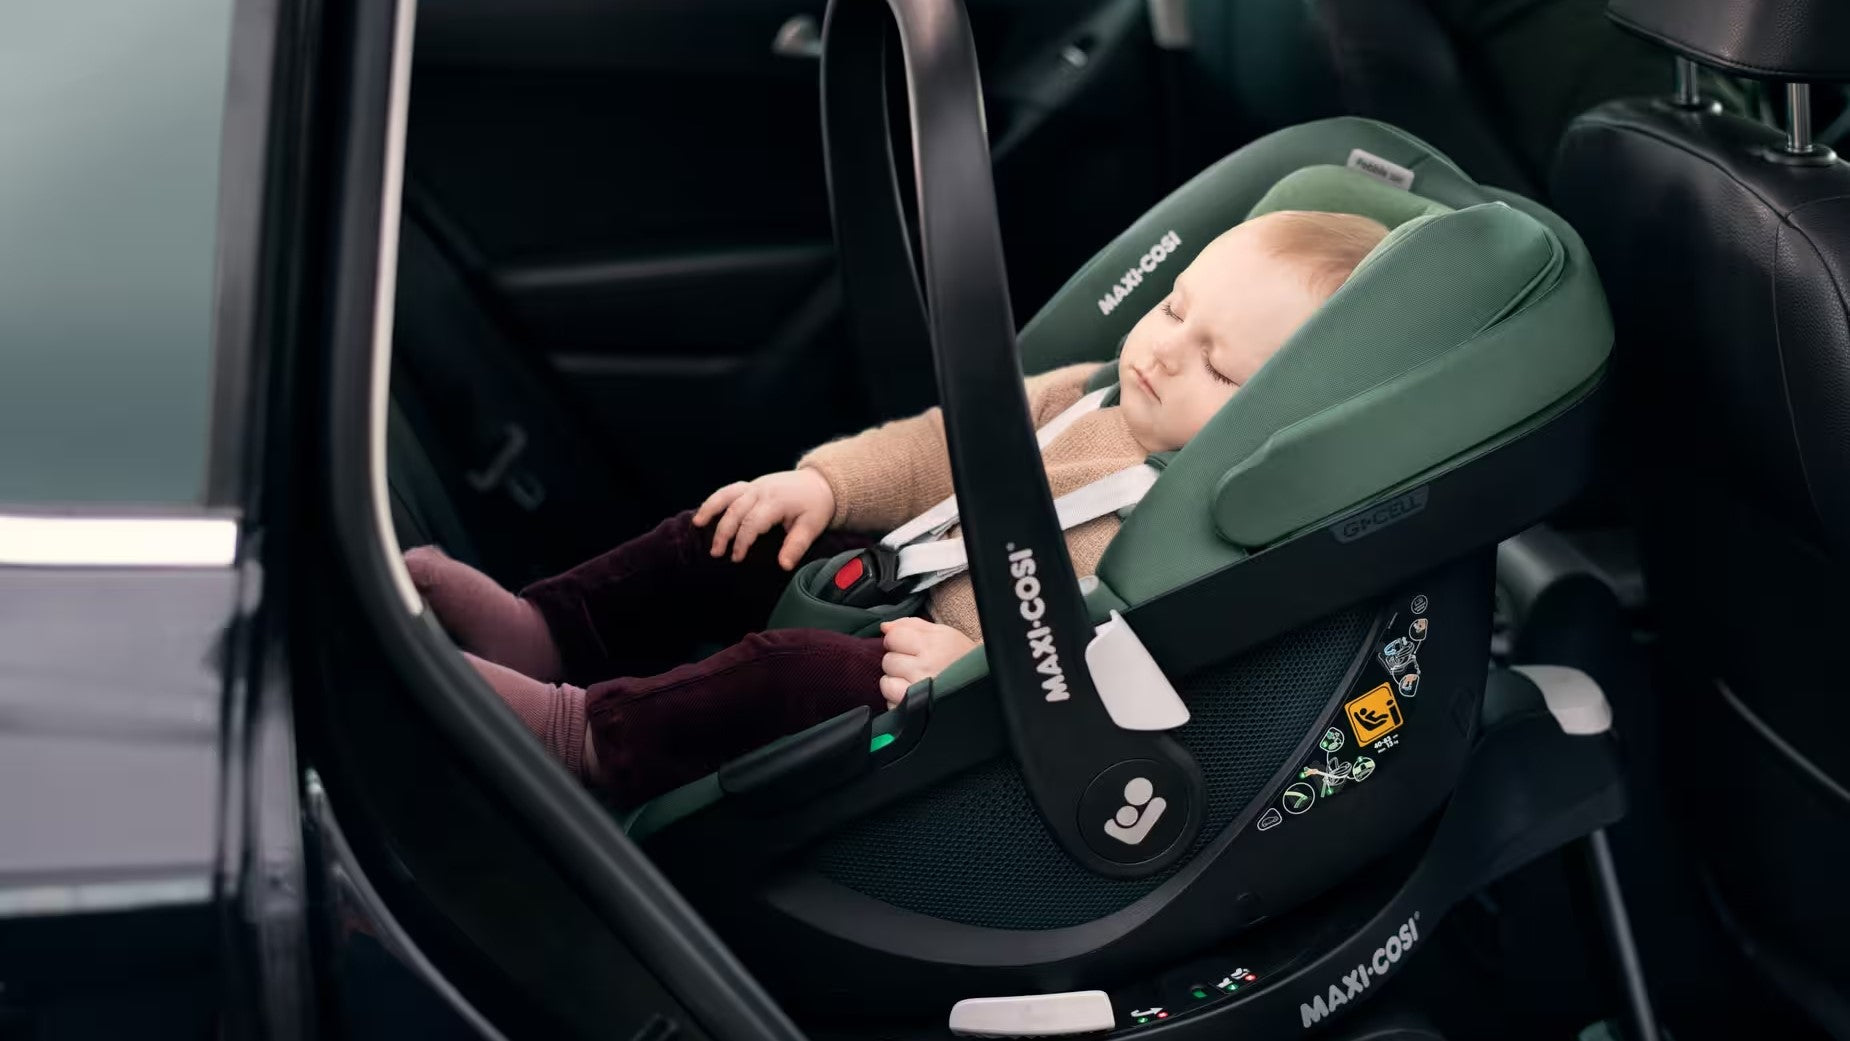 Best 6 Infant Car Seats To Buy In Singapore To Bring Baby Home From Hospital